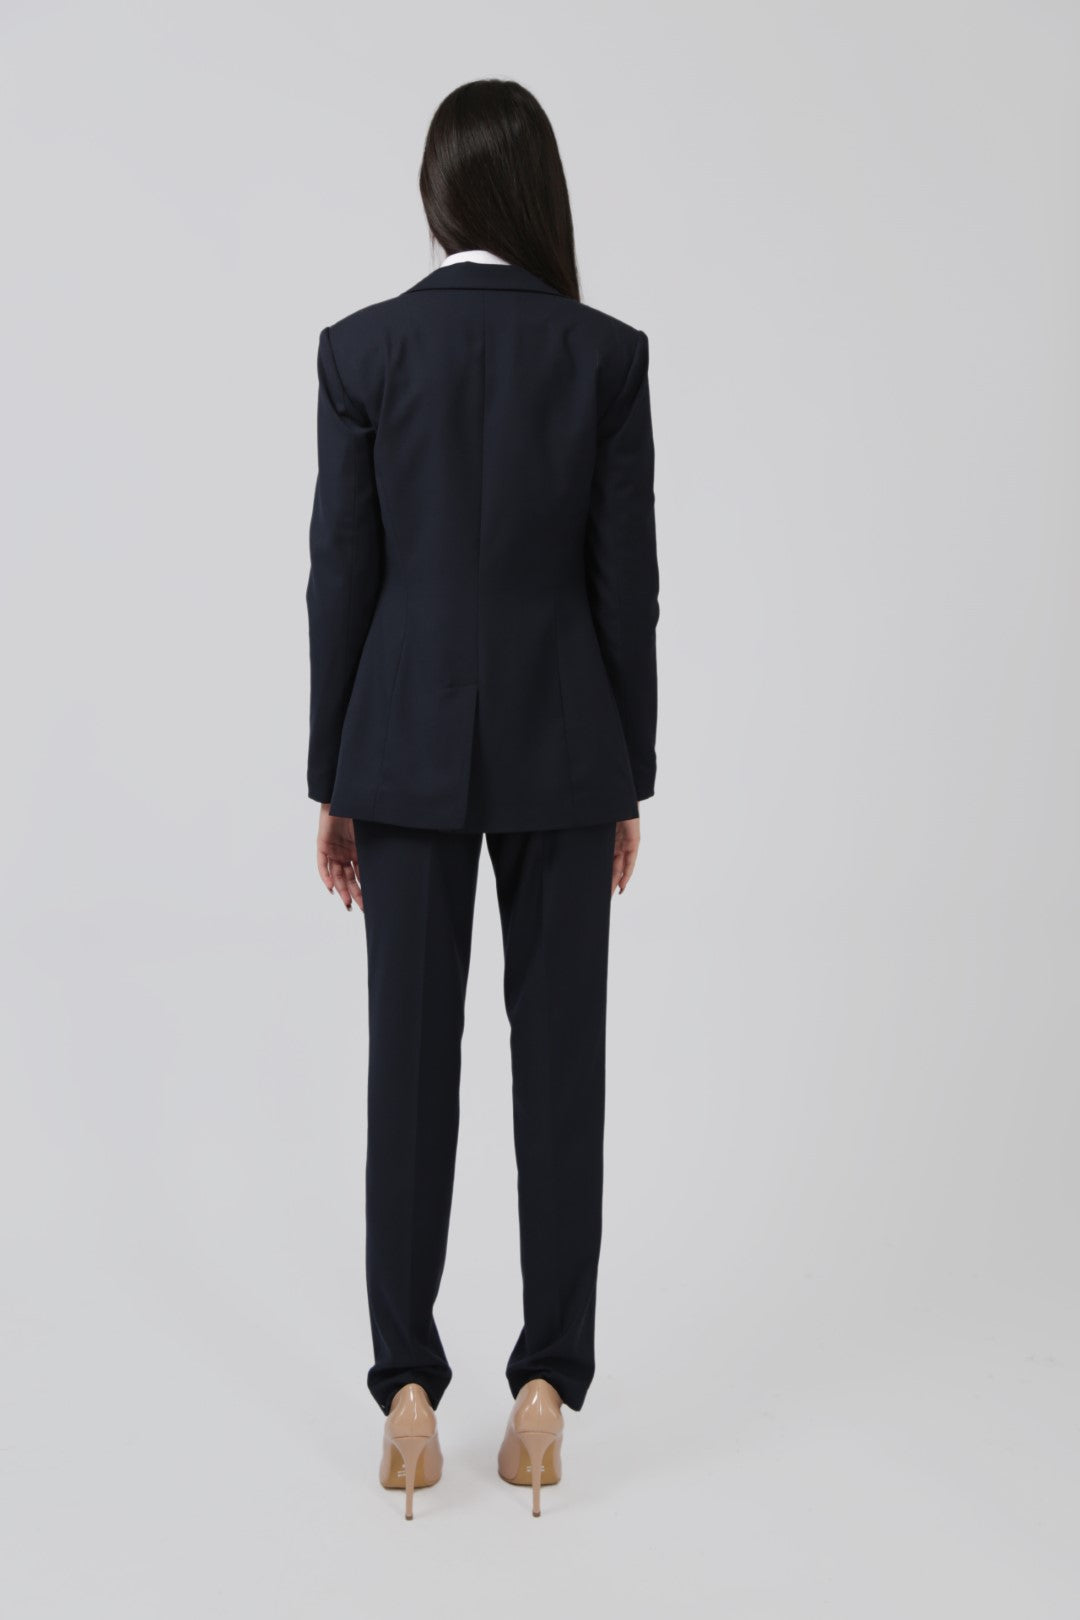 Tailored Fitted Suit